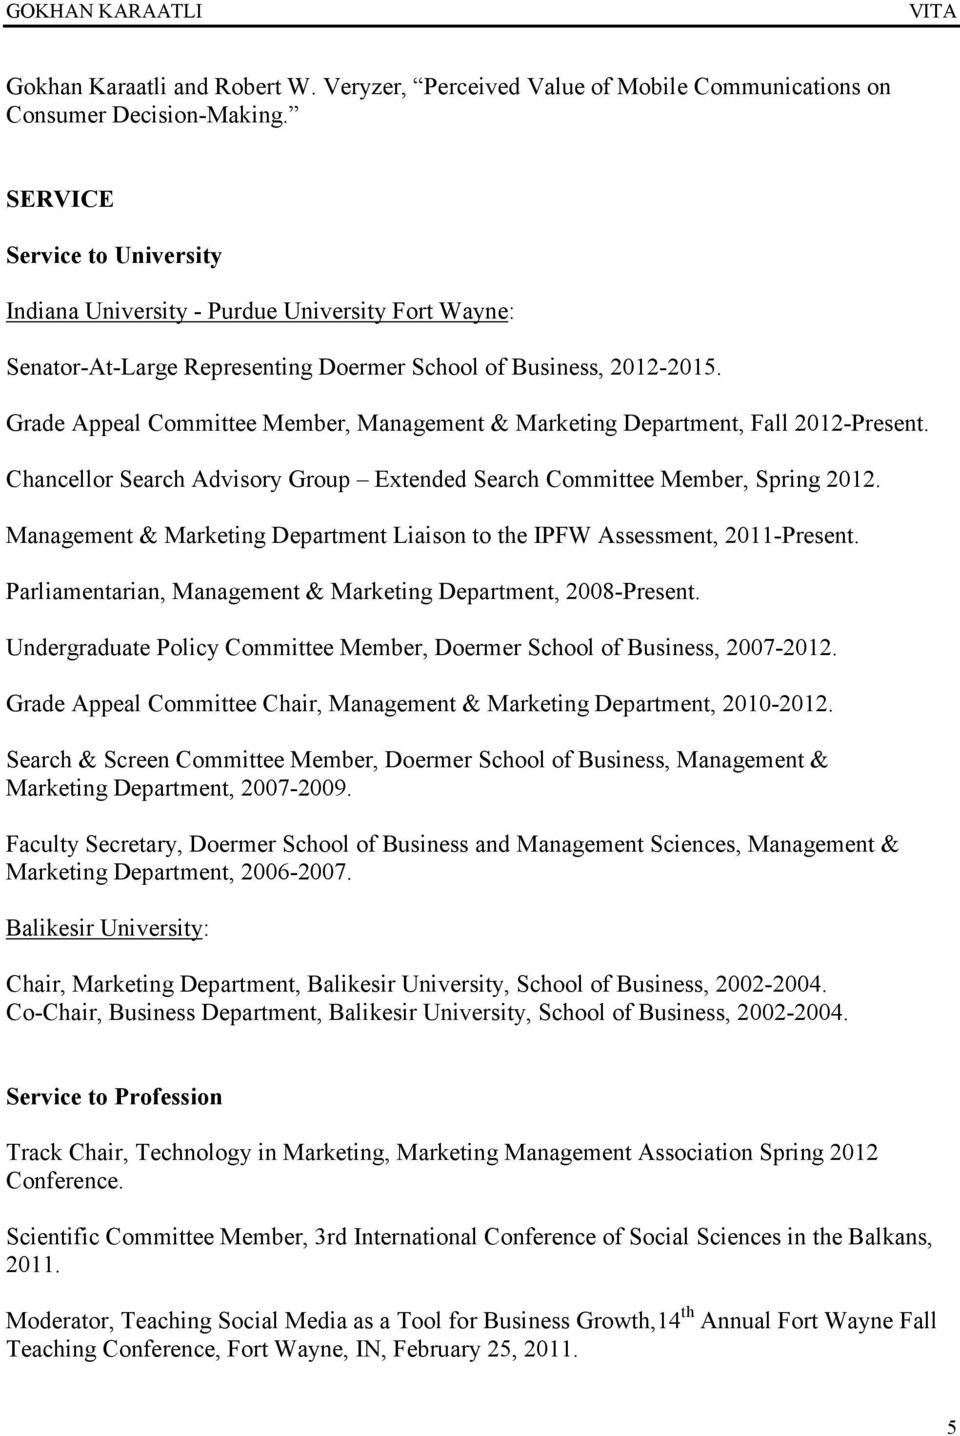 Grade Appeal Committee Member, Management & Marketing Department, Fall 2012-Present. Chancellor Search Advisory Group Extended Search Committee Member, Spring 2012.